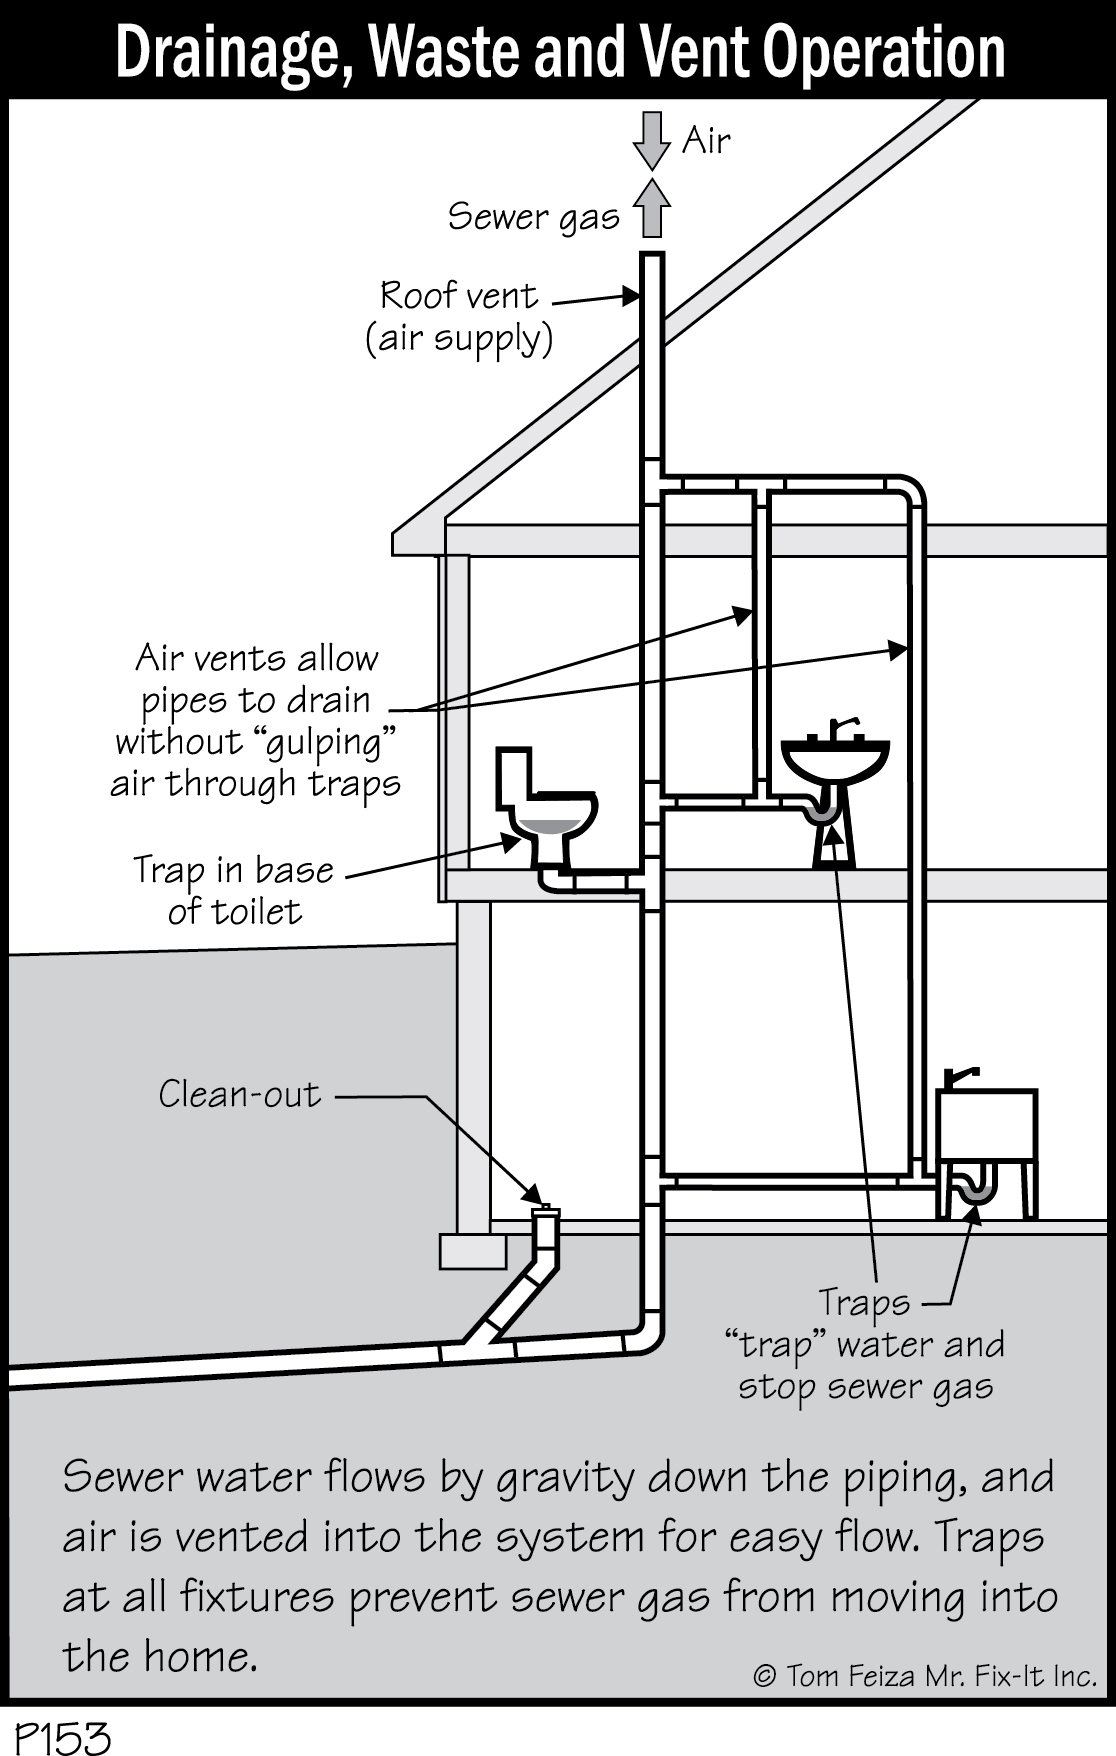 P153 - Drainage, Waste and Vent Operation